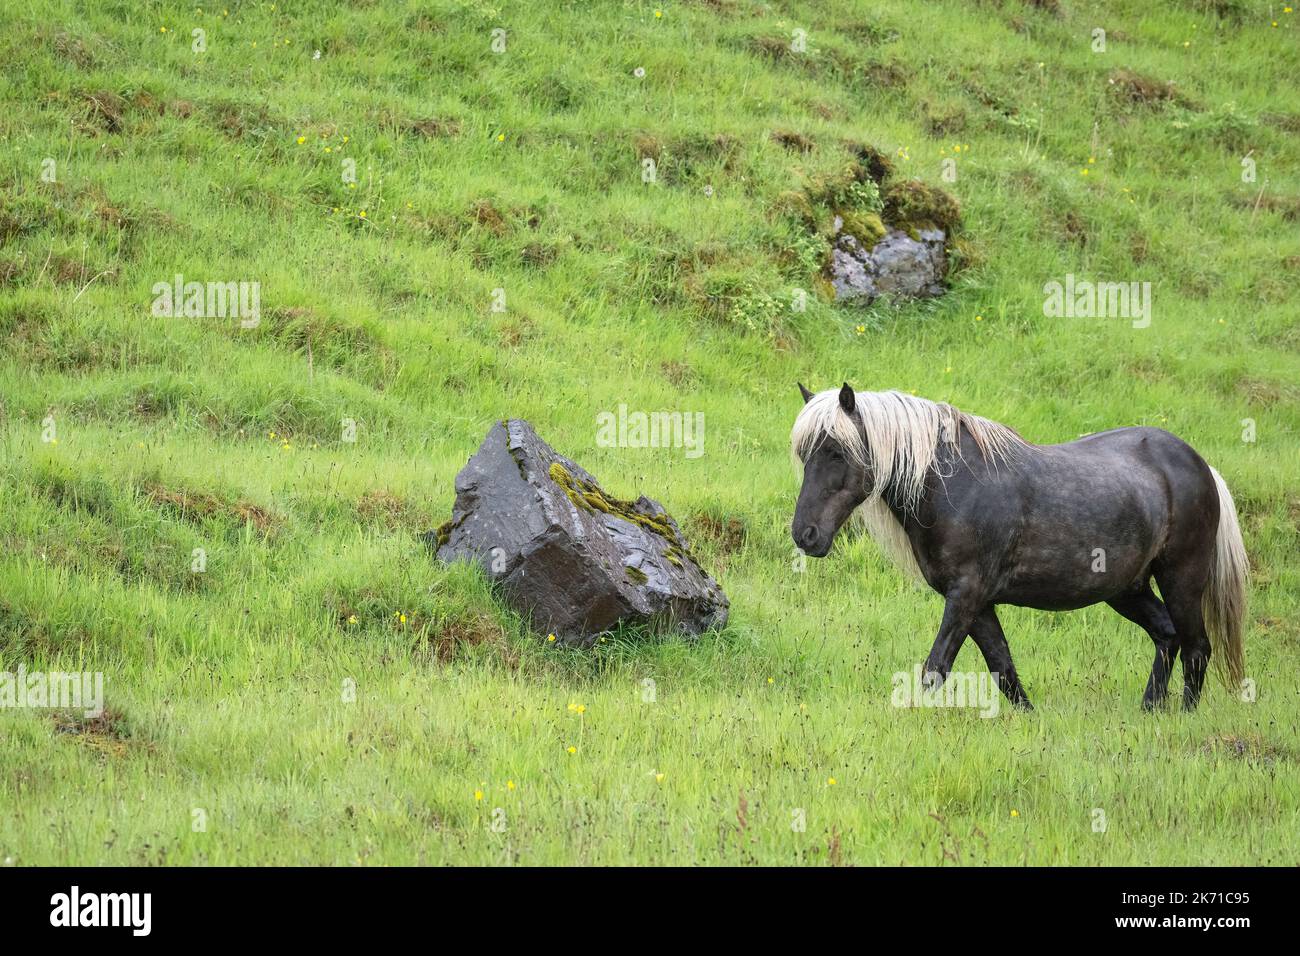 Dark dapple gray Icelandic horse with cream colored mane and tail, walking on a hillside of spring green grass Stock Photo